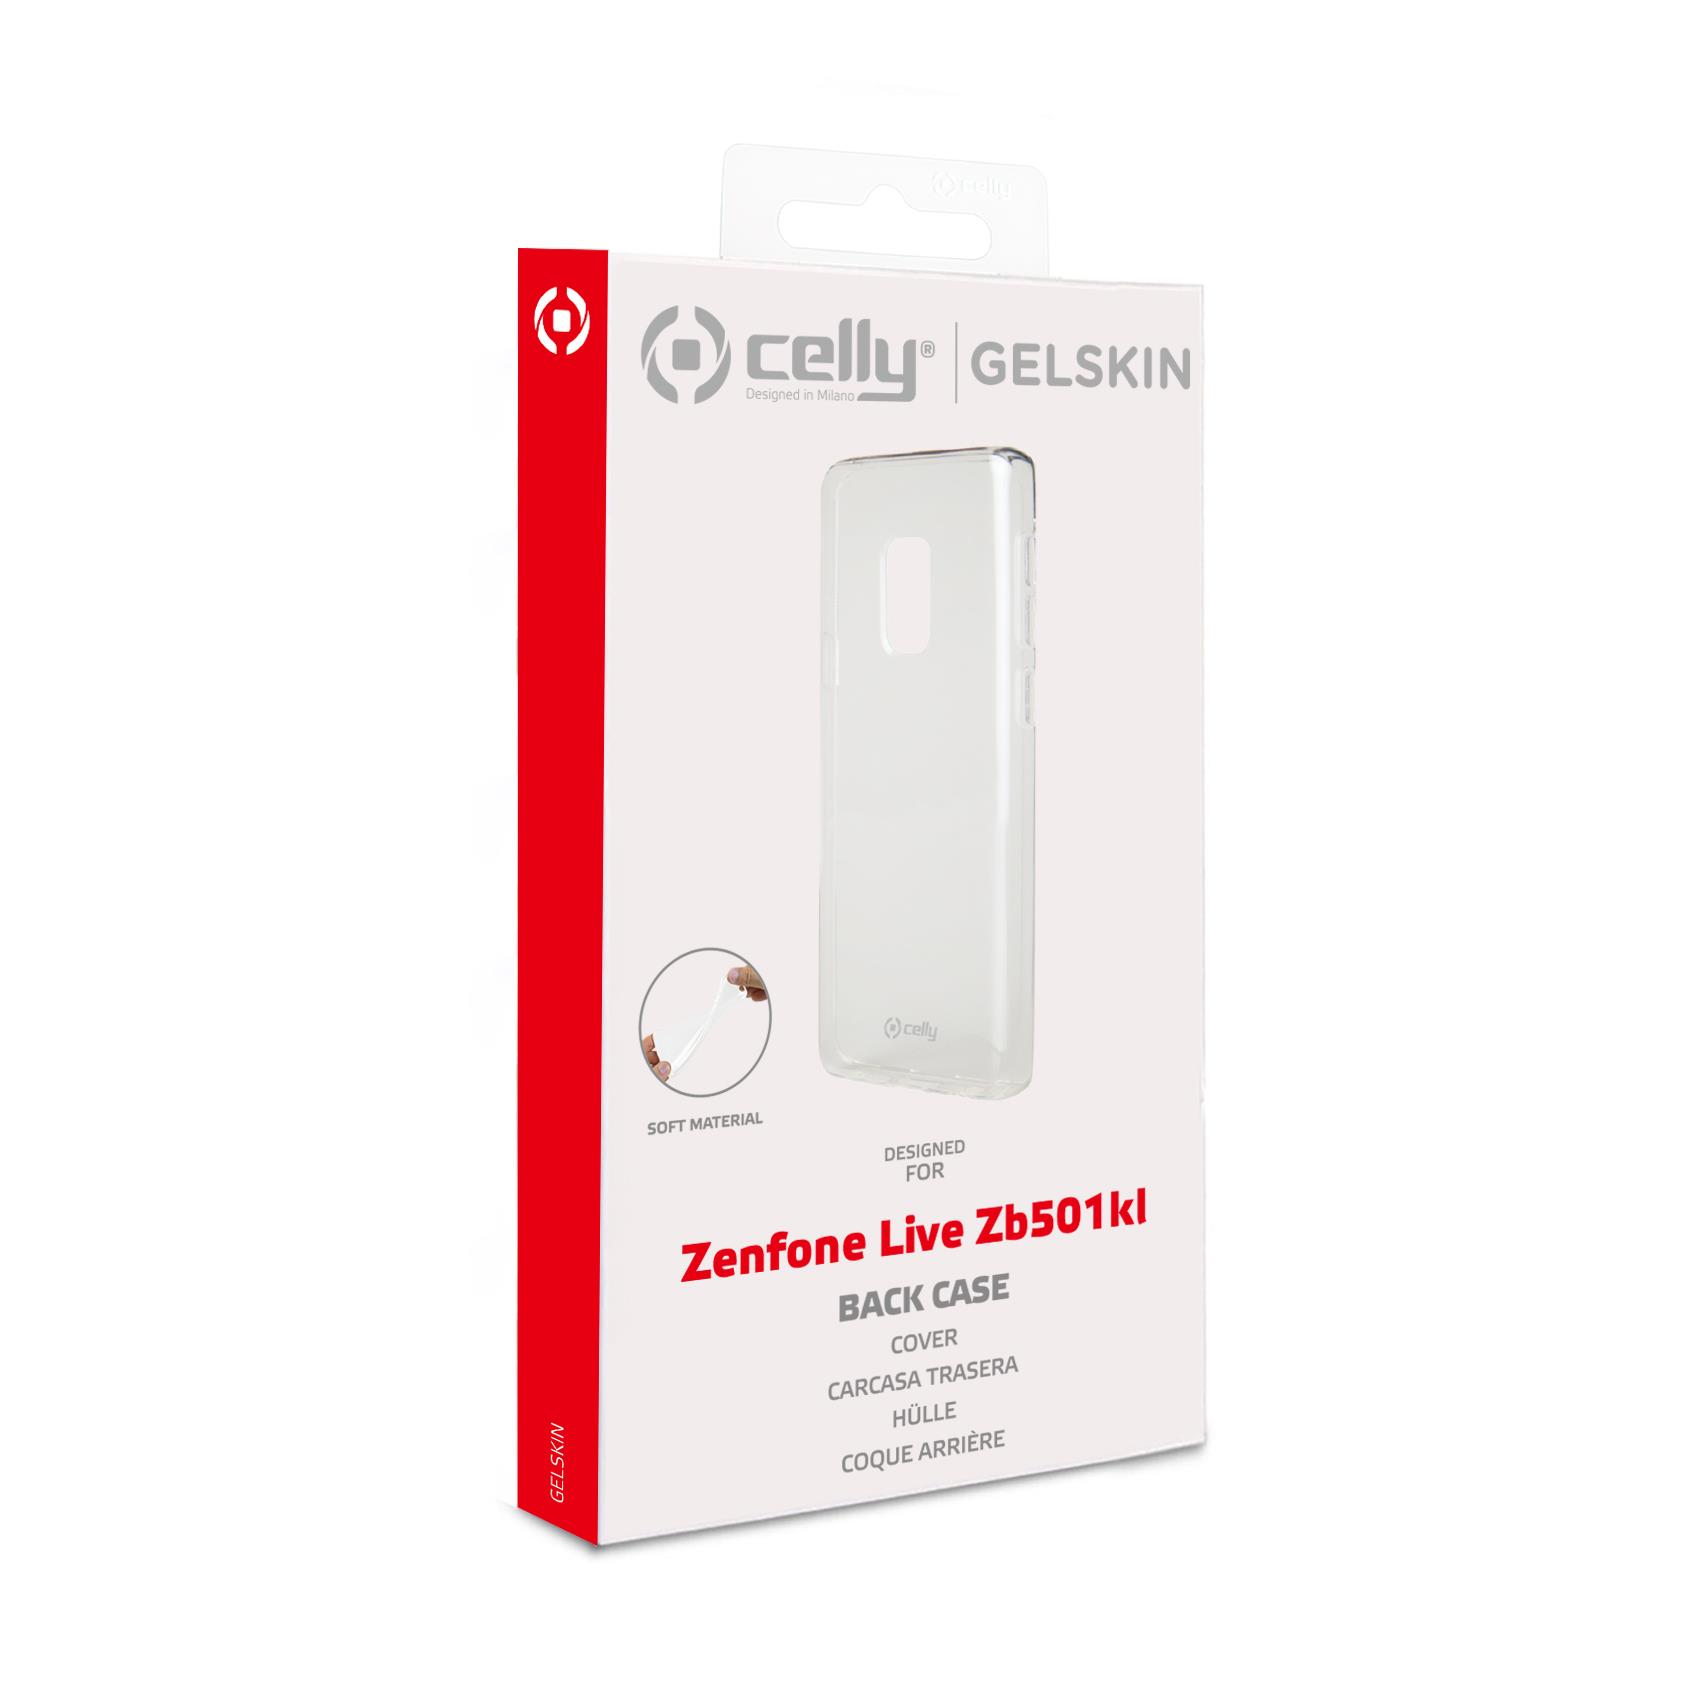 Tpu Cover Zenfone Live Zb501kl Celly Gelskin680 8021735732471